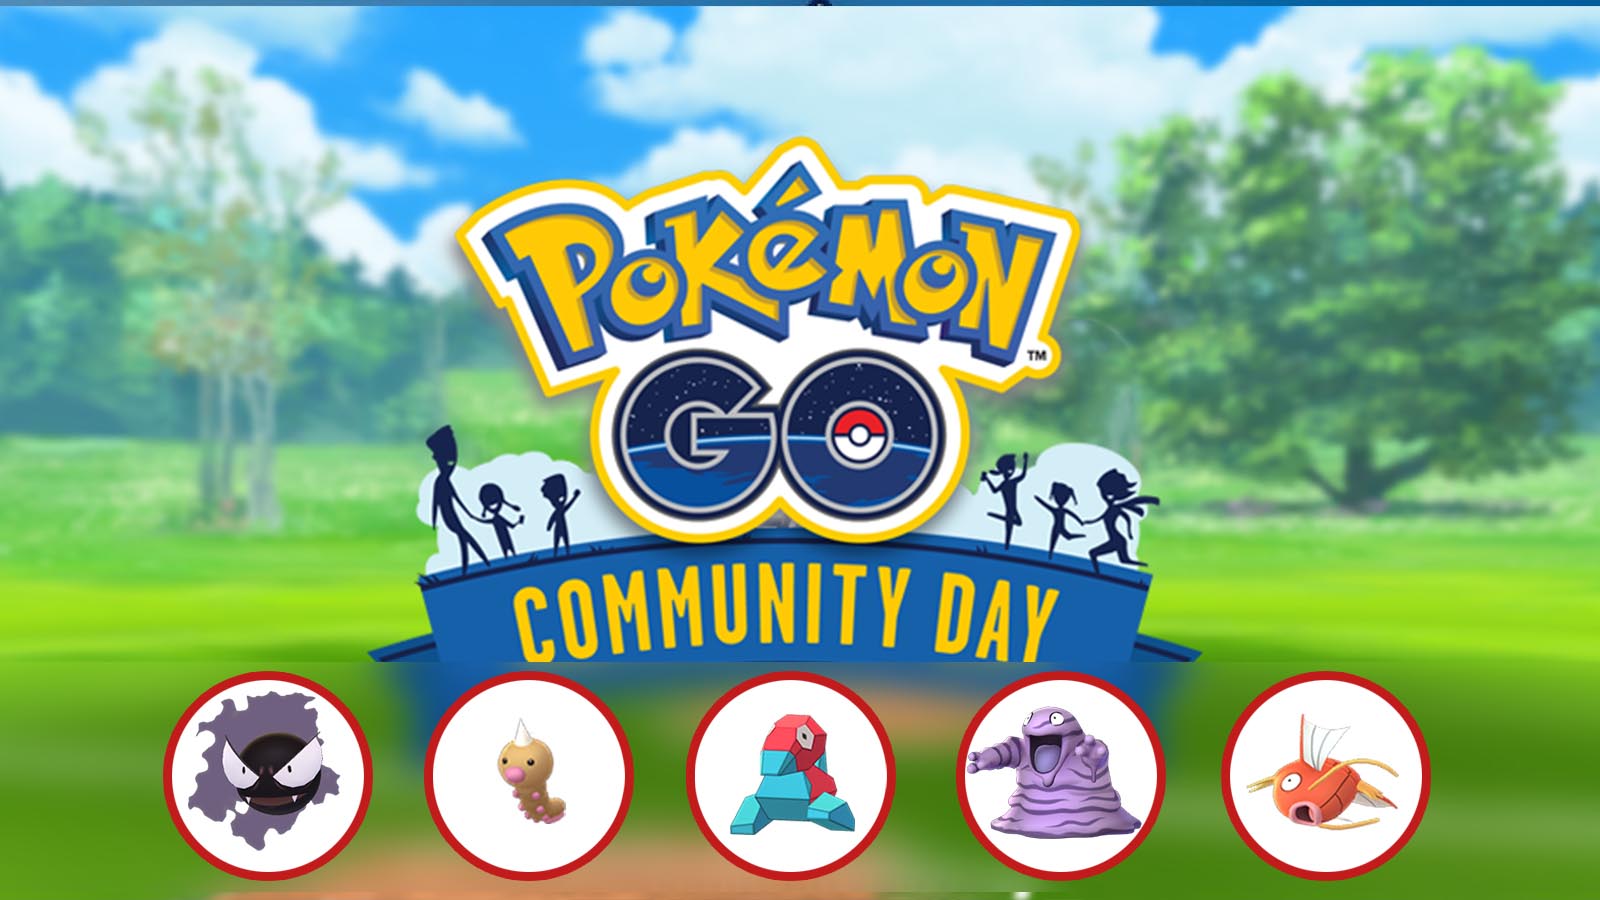 Pokemon Go 3 Upcoming Community Day Voting Quests Event Pokemon Mass Transfer And Much More Pokewreck